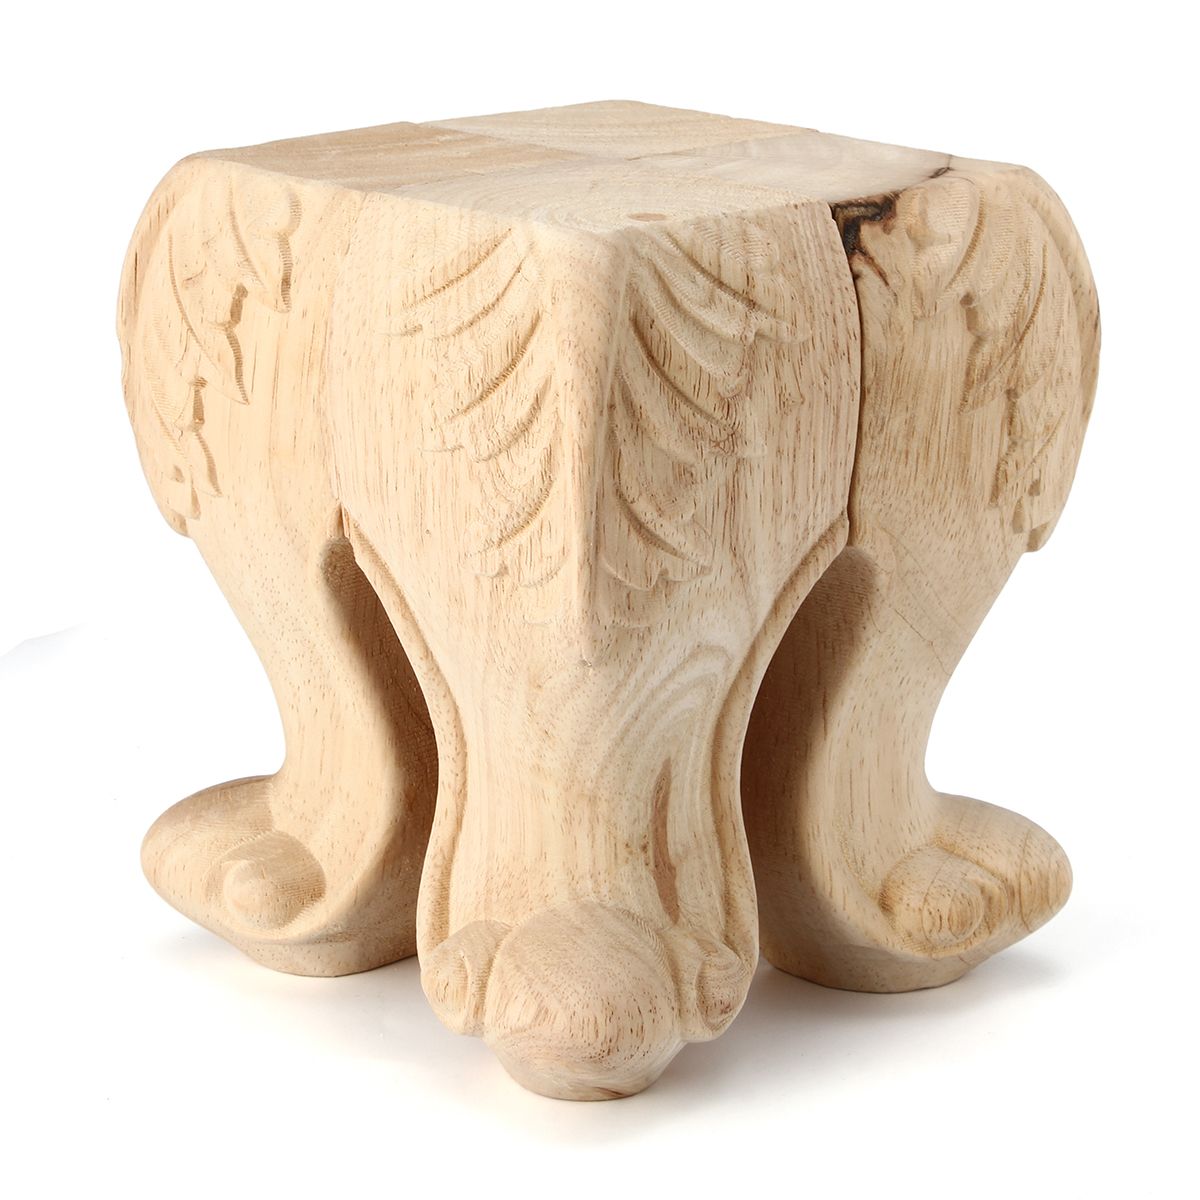 4Pcs-1015cm-European-Solid-Wood-Applique-Carving-Furniture-Foot-Legs-Unpainted-Cabinet-Feets-Decal-1322685